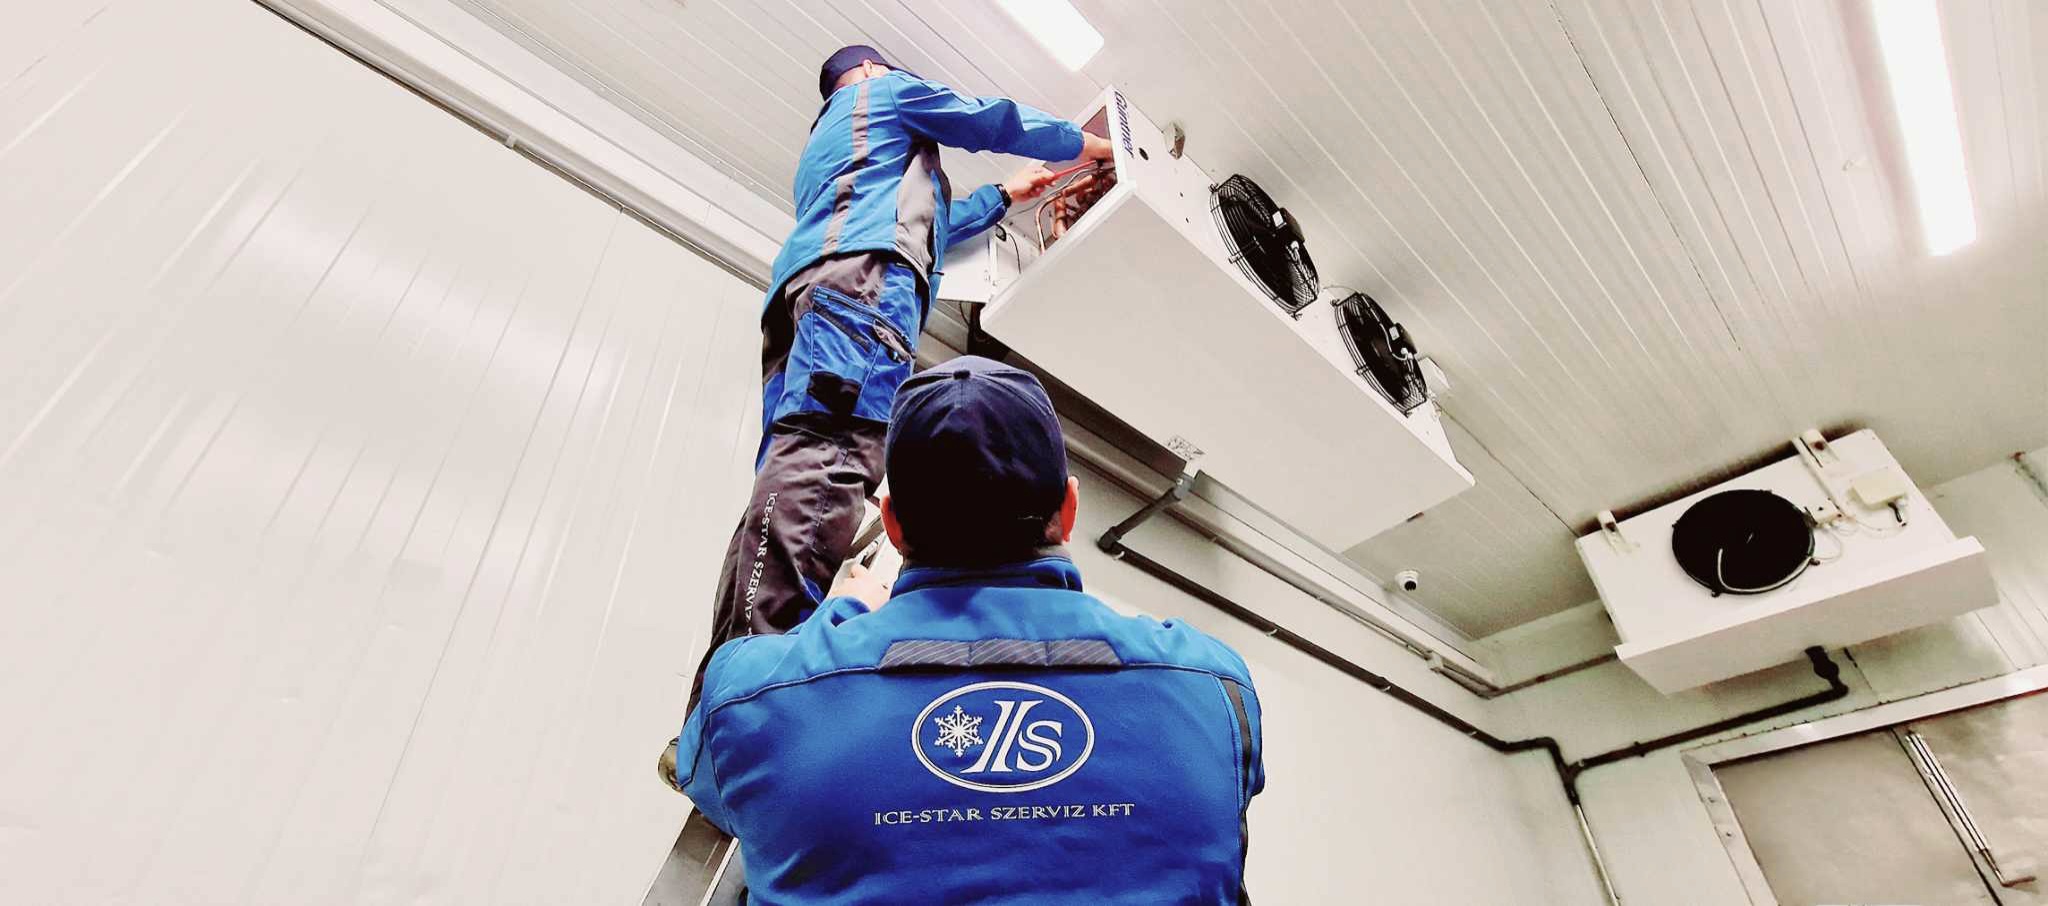 Our staff installing the new refrigeration system at the meat plant